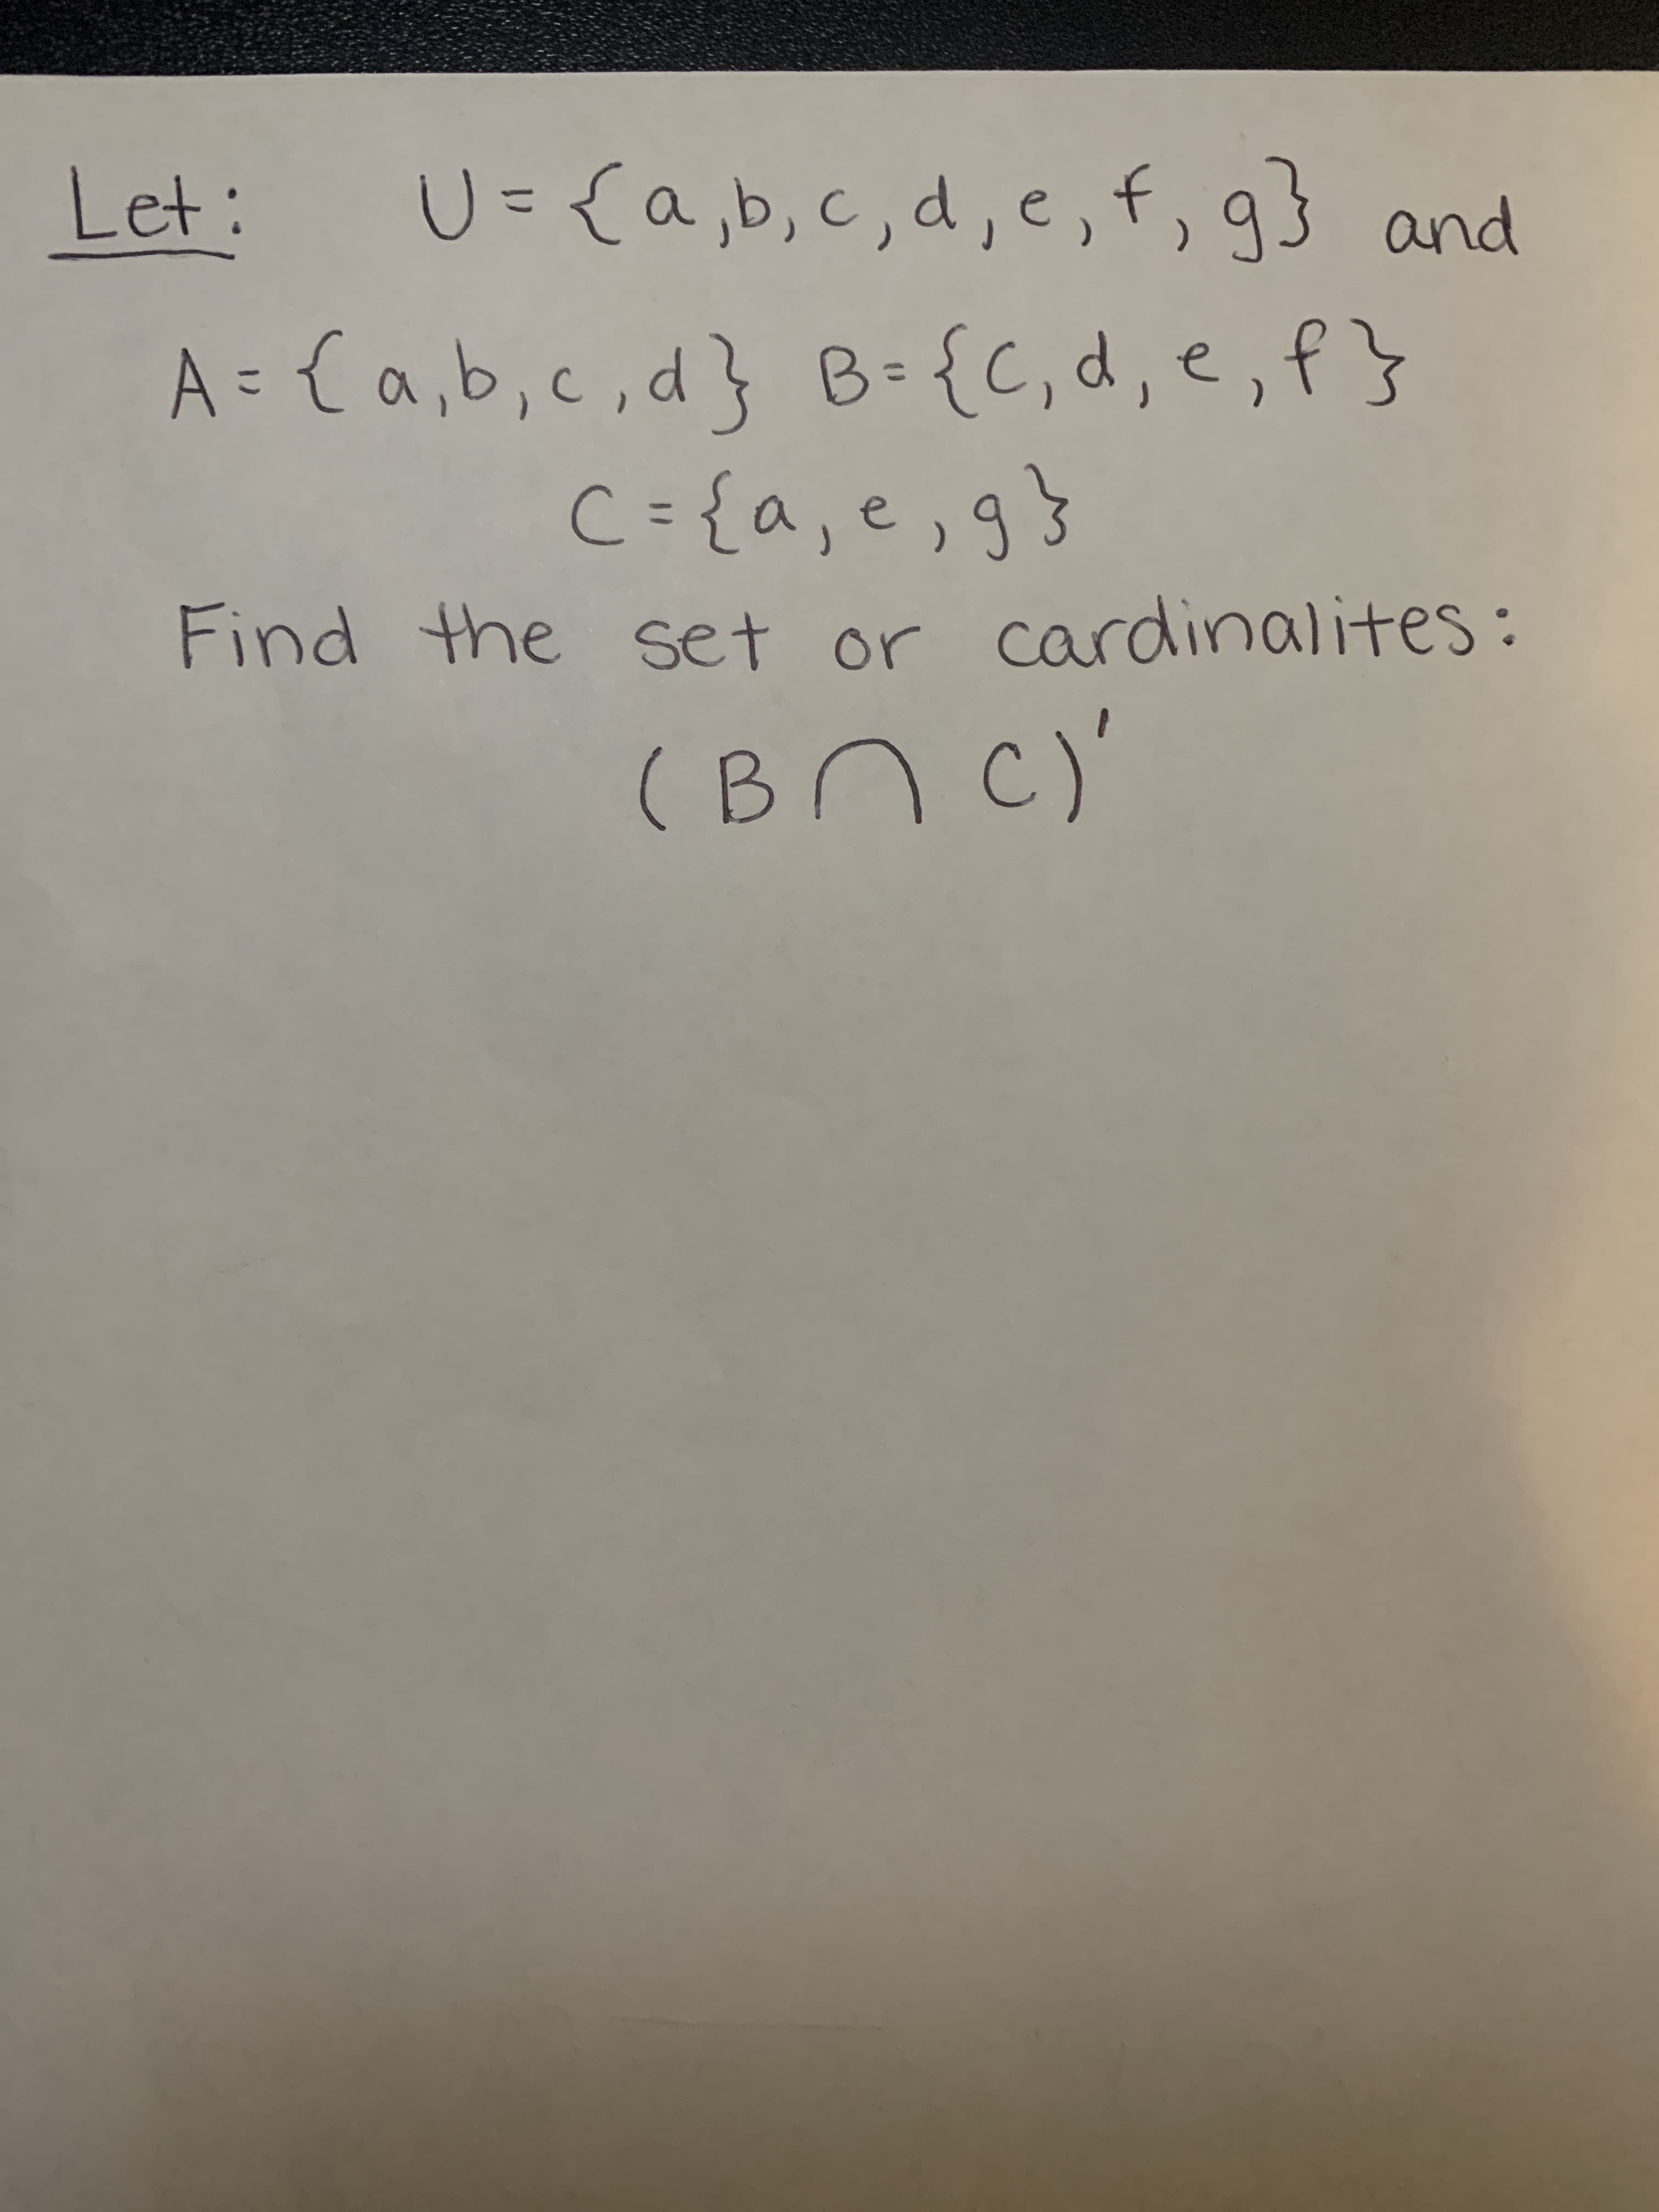 Let:
U={a,b, c,d, e, f, g} and
to
A= {a,b,c,d} B={C,d, e, f}
C={a, e,g}
%3D
Find the set or cardinalites:
(BN C)'
